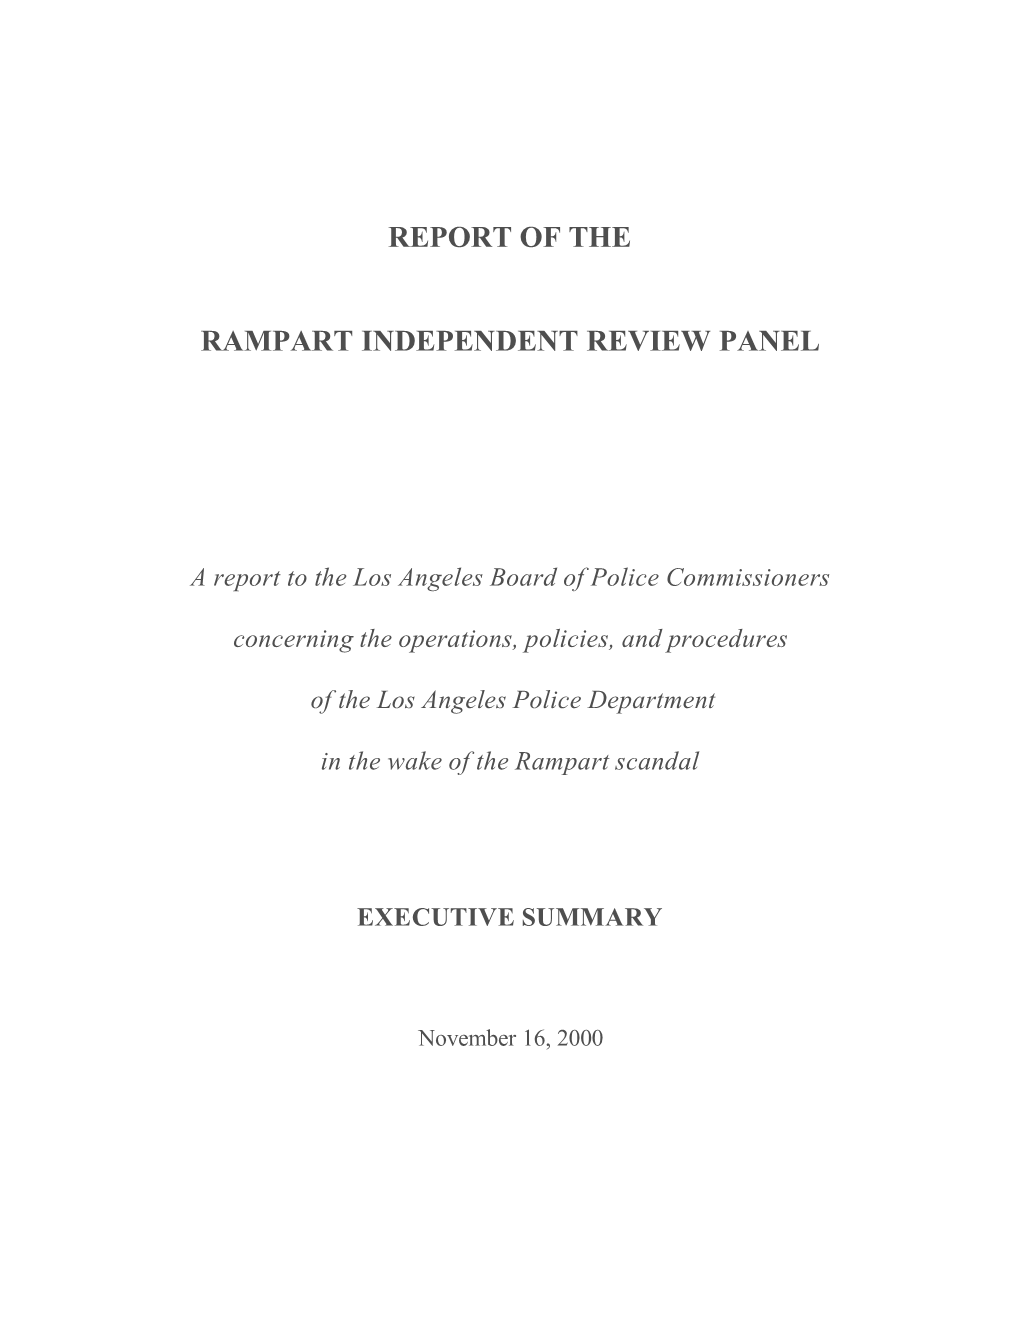 Report of the Rampart Independent Review Panel